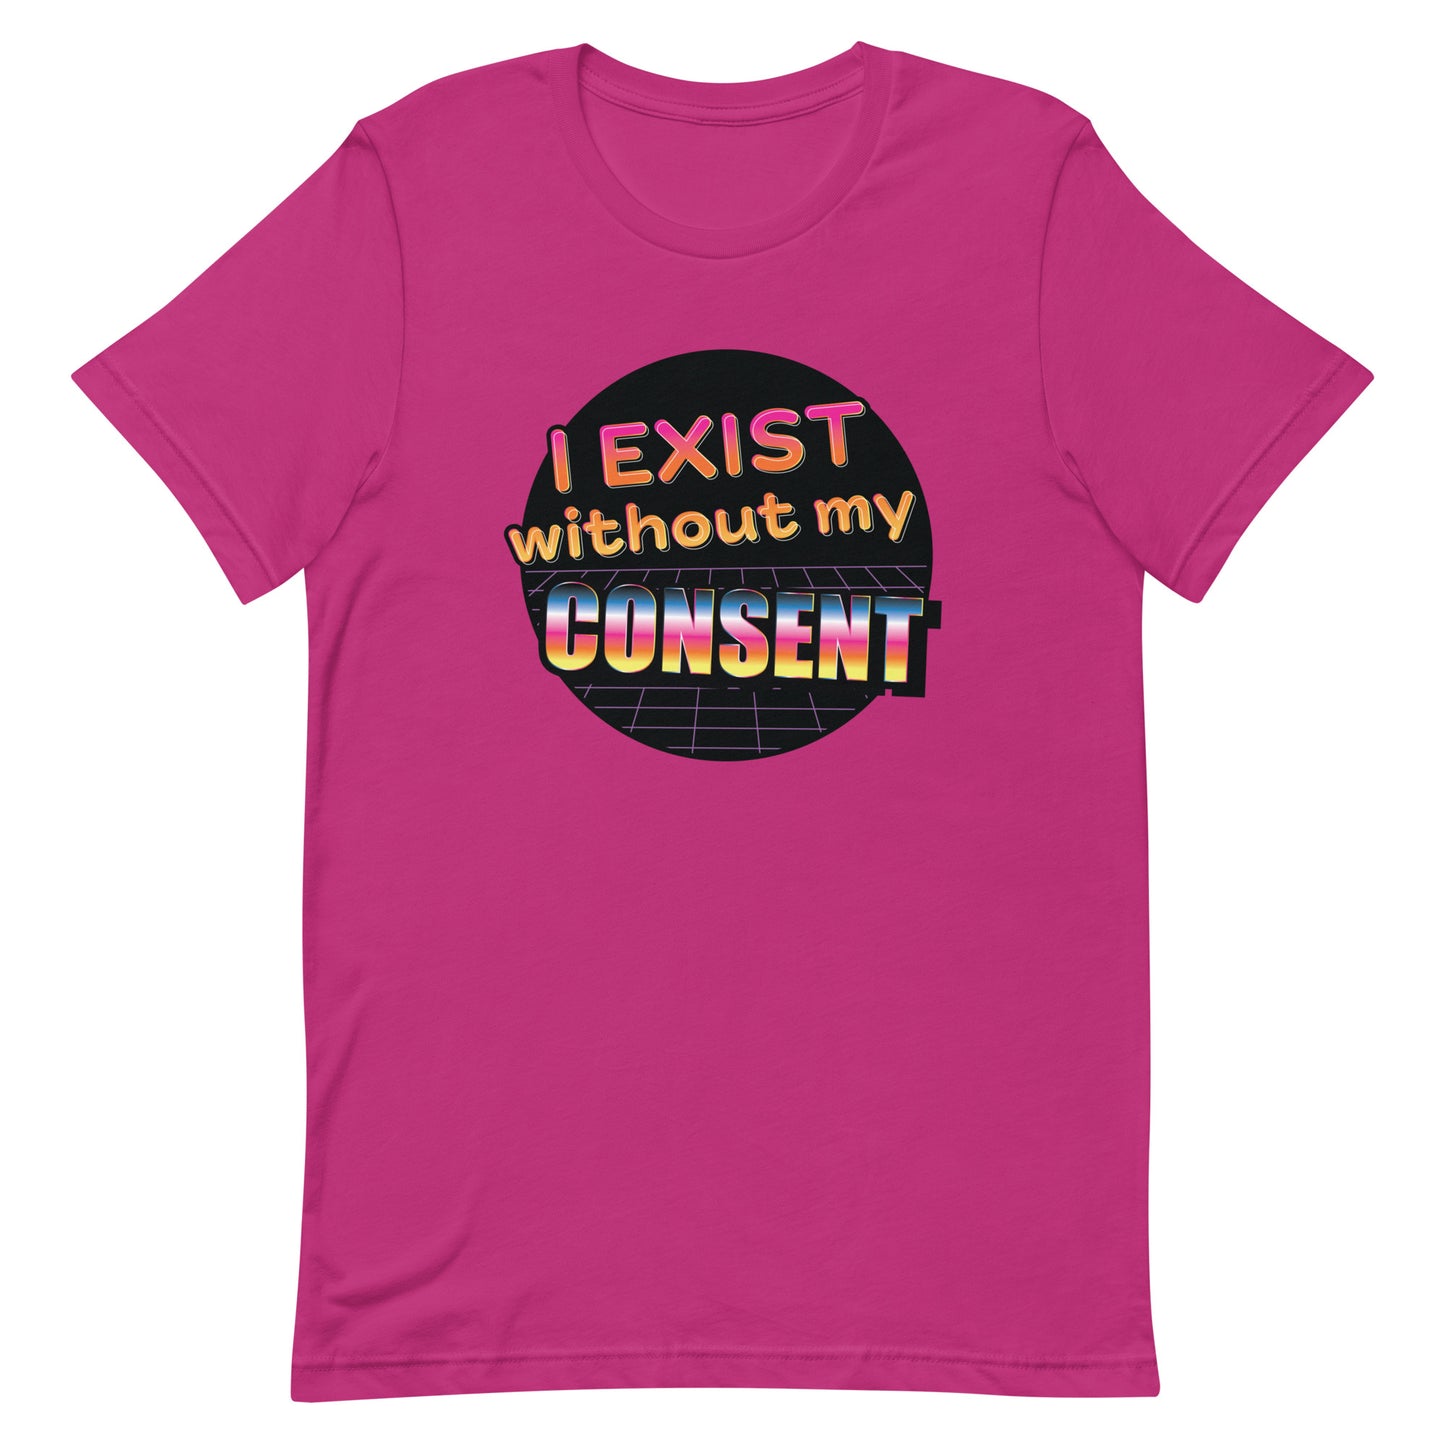 A bright pink crewneck t-shirt featuring an 80's style graphic with brightly colored text that reads "I exist without my consent"